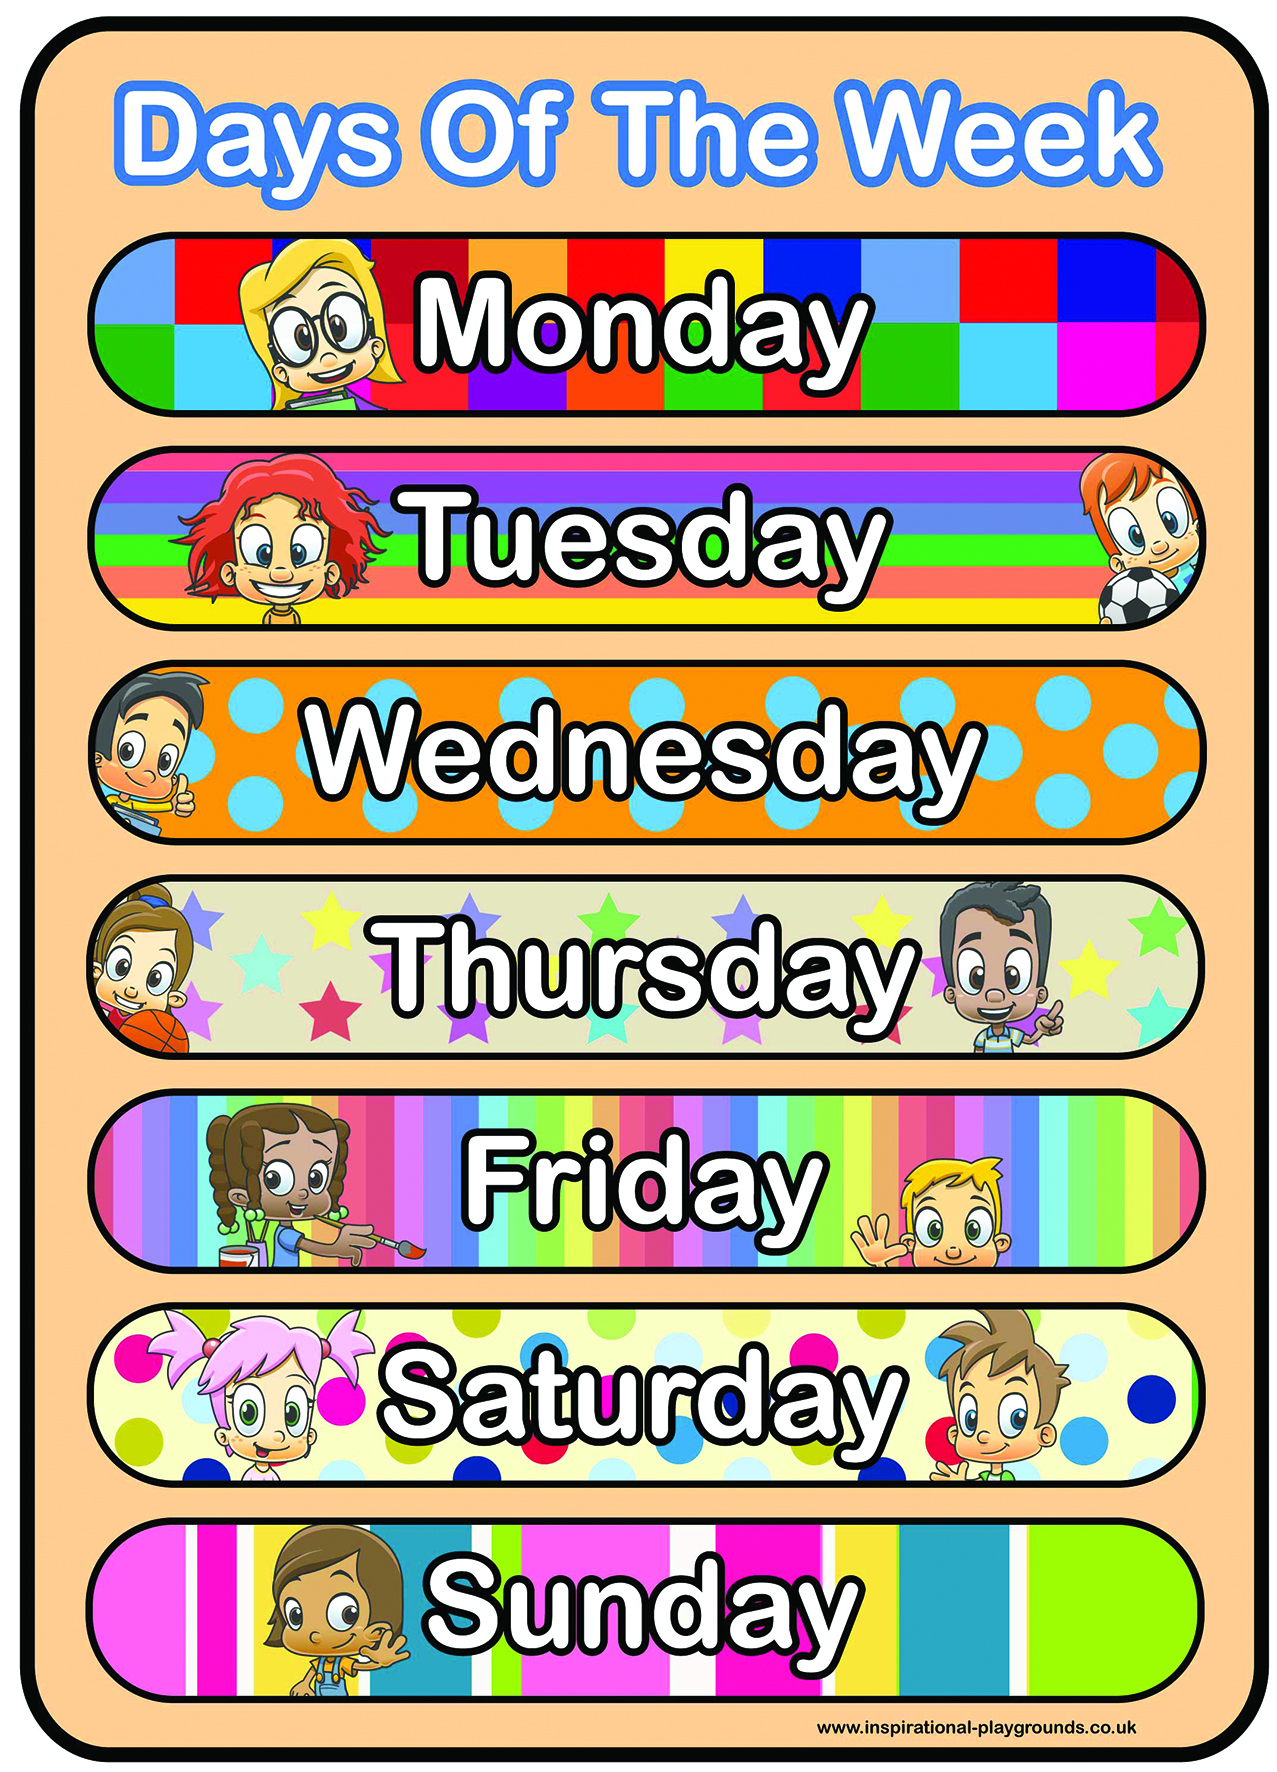 Weekend month. Days of the week. Days of the week плакат. Карточки Days of the week. Days of the week for Kids.